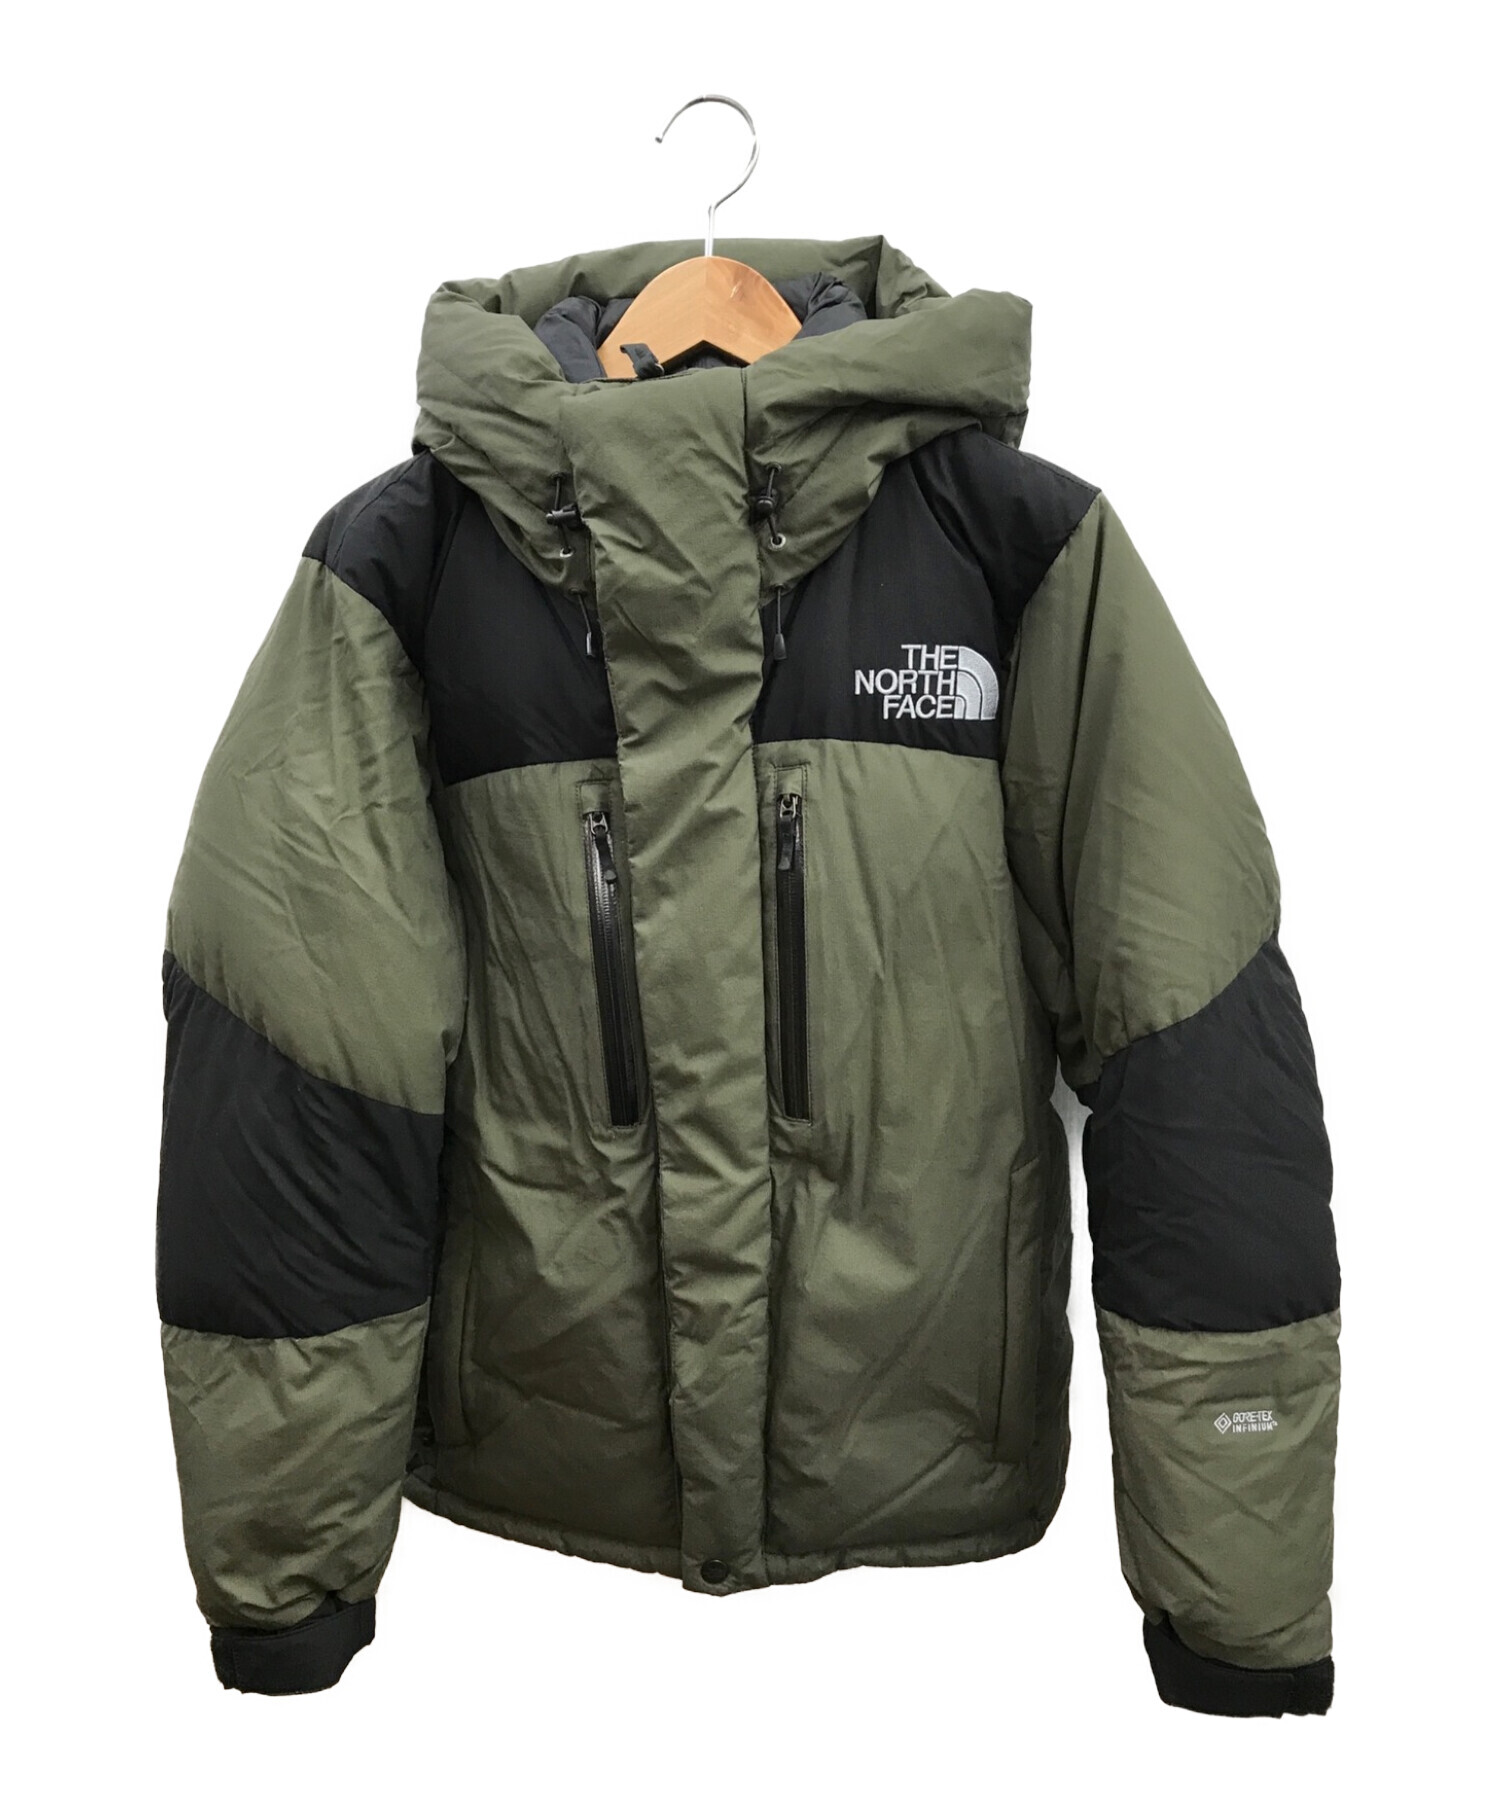 THE NORTH FACE バルトロライトジャケット ニュートープ S